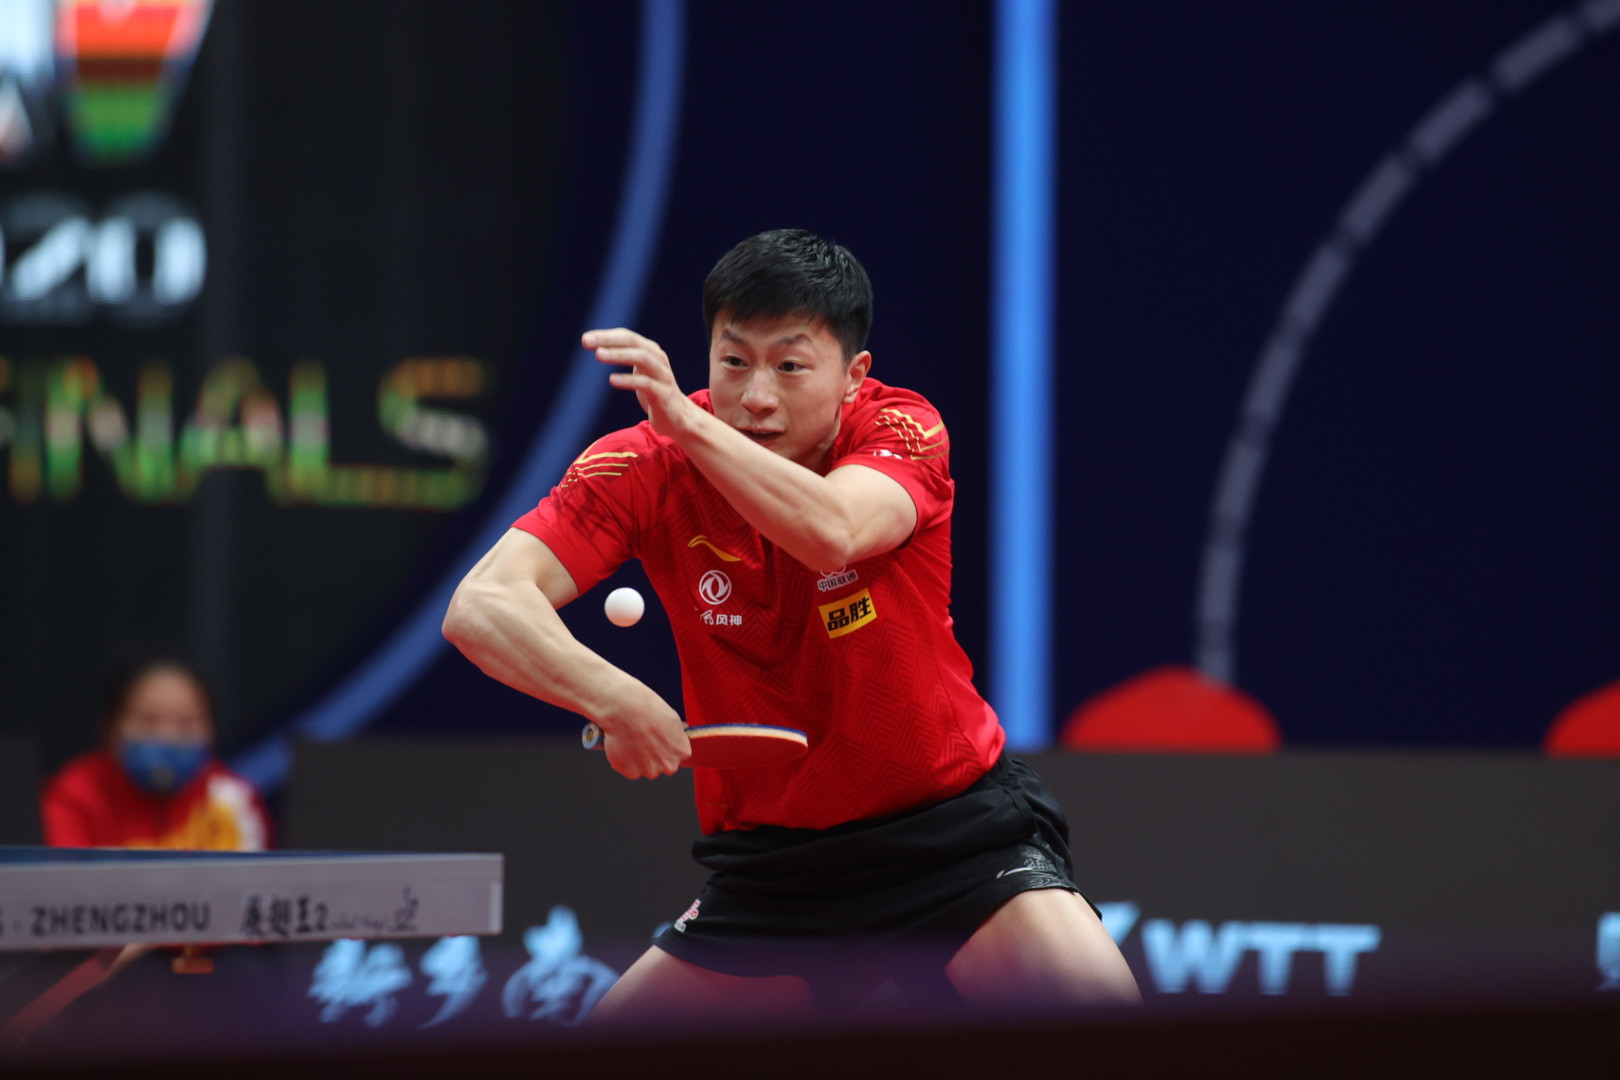 Ma and Fan set for another final as Chen closes in on ITTF Finals history